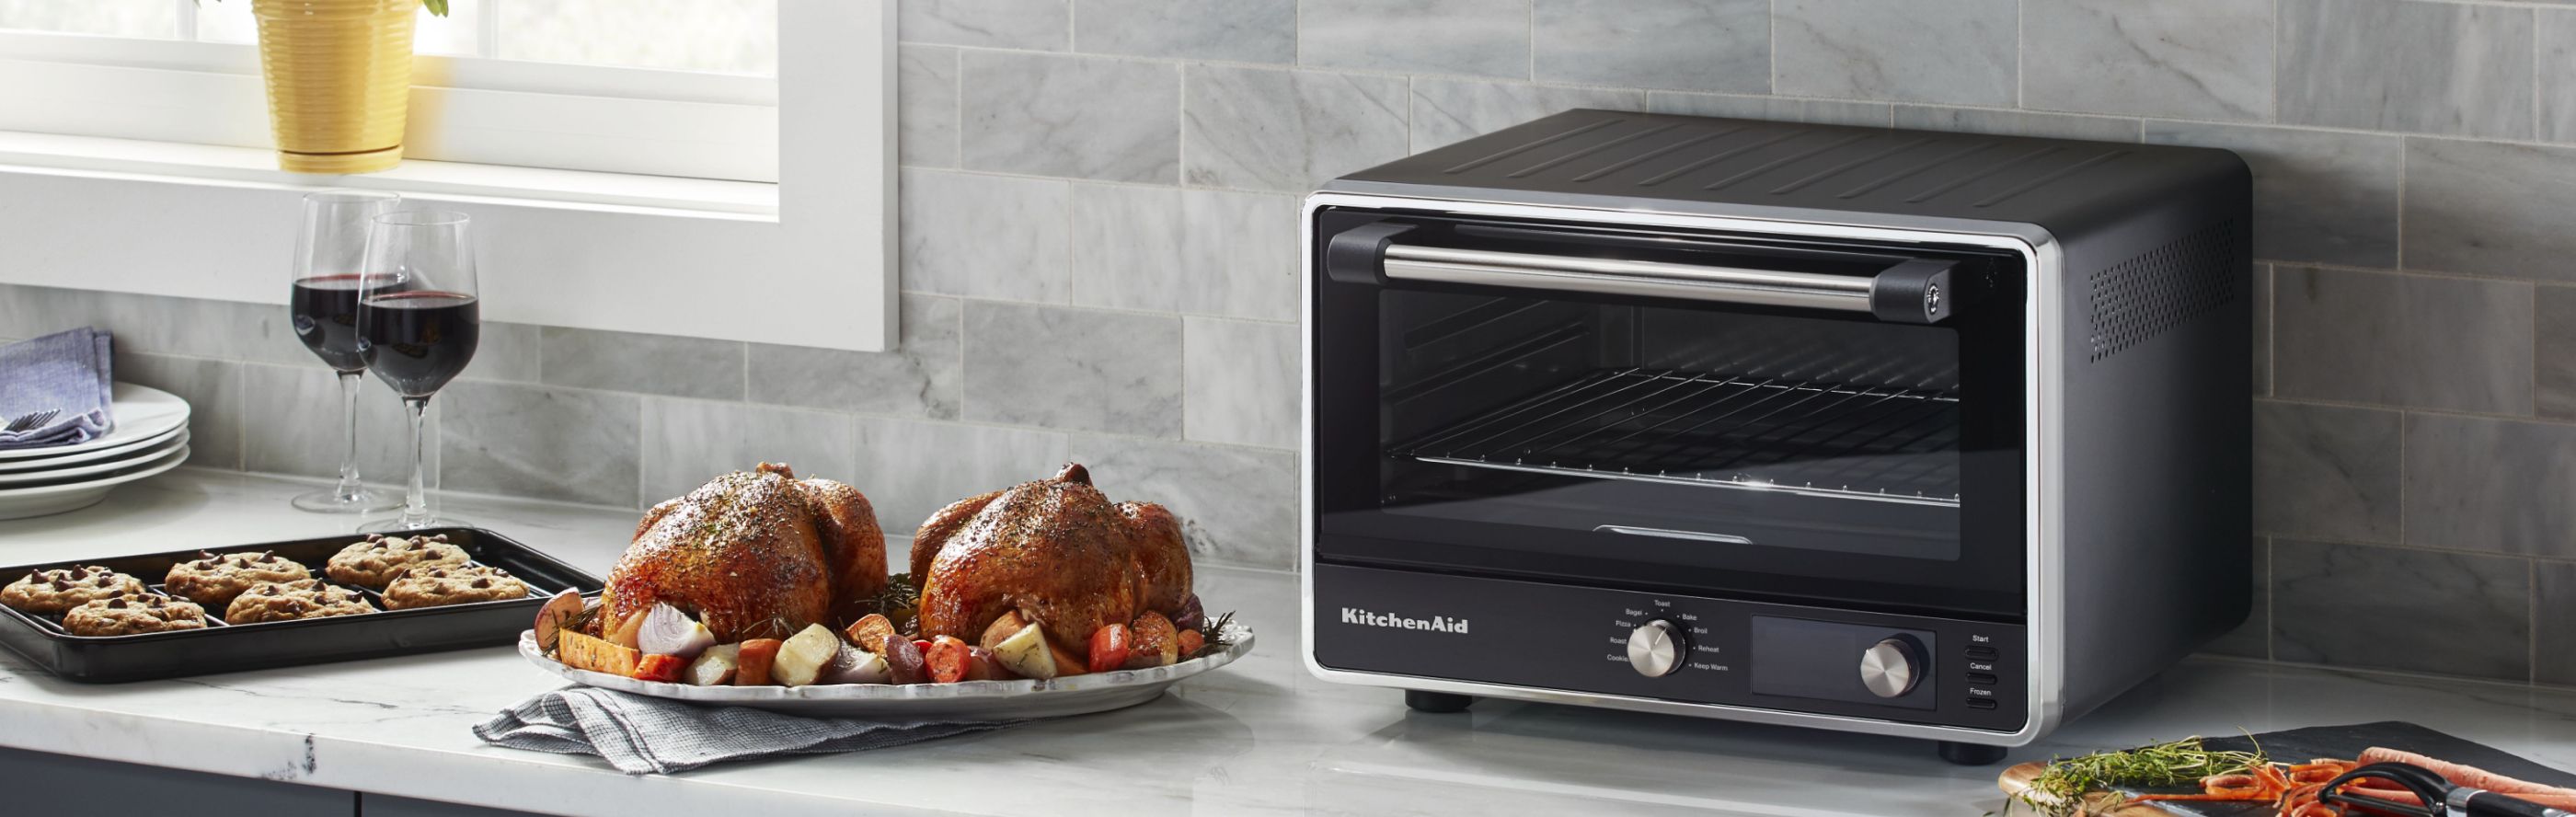  KitchenAid countertop oven with roasted chicken and vegetables on the side